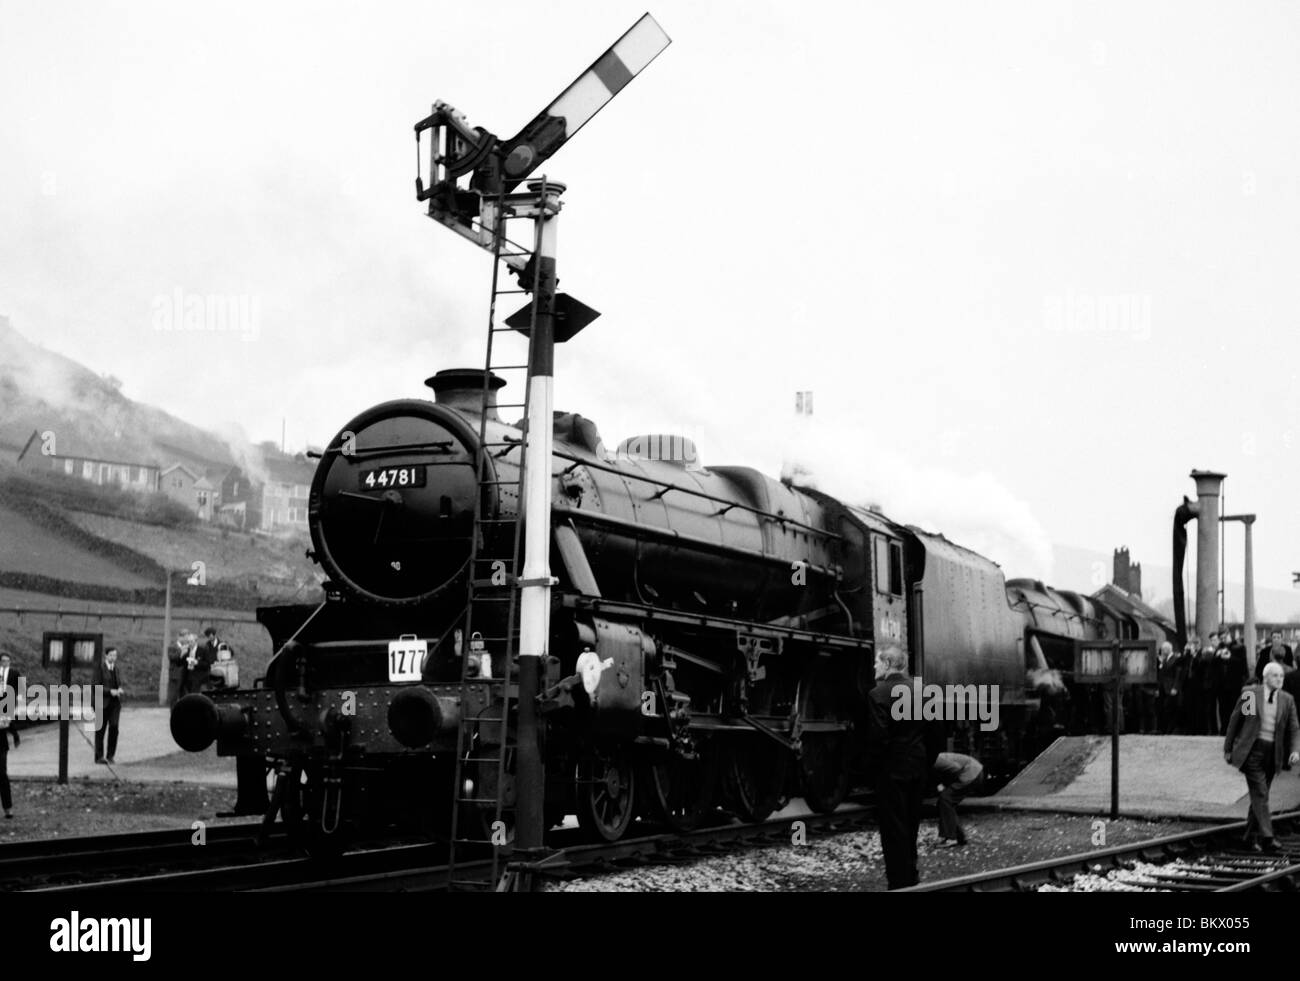 engine number 44781 heads an excursion during the final days of steam on british rail Stock Photo